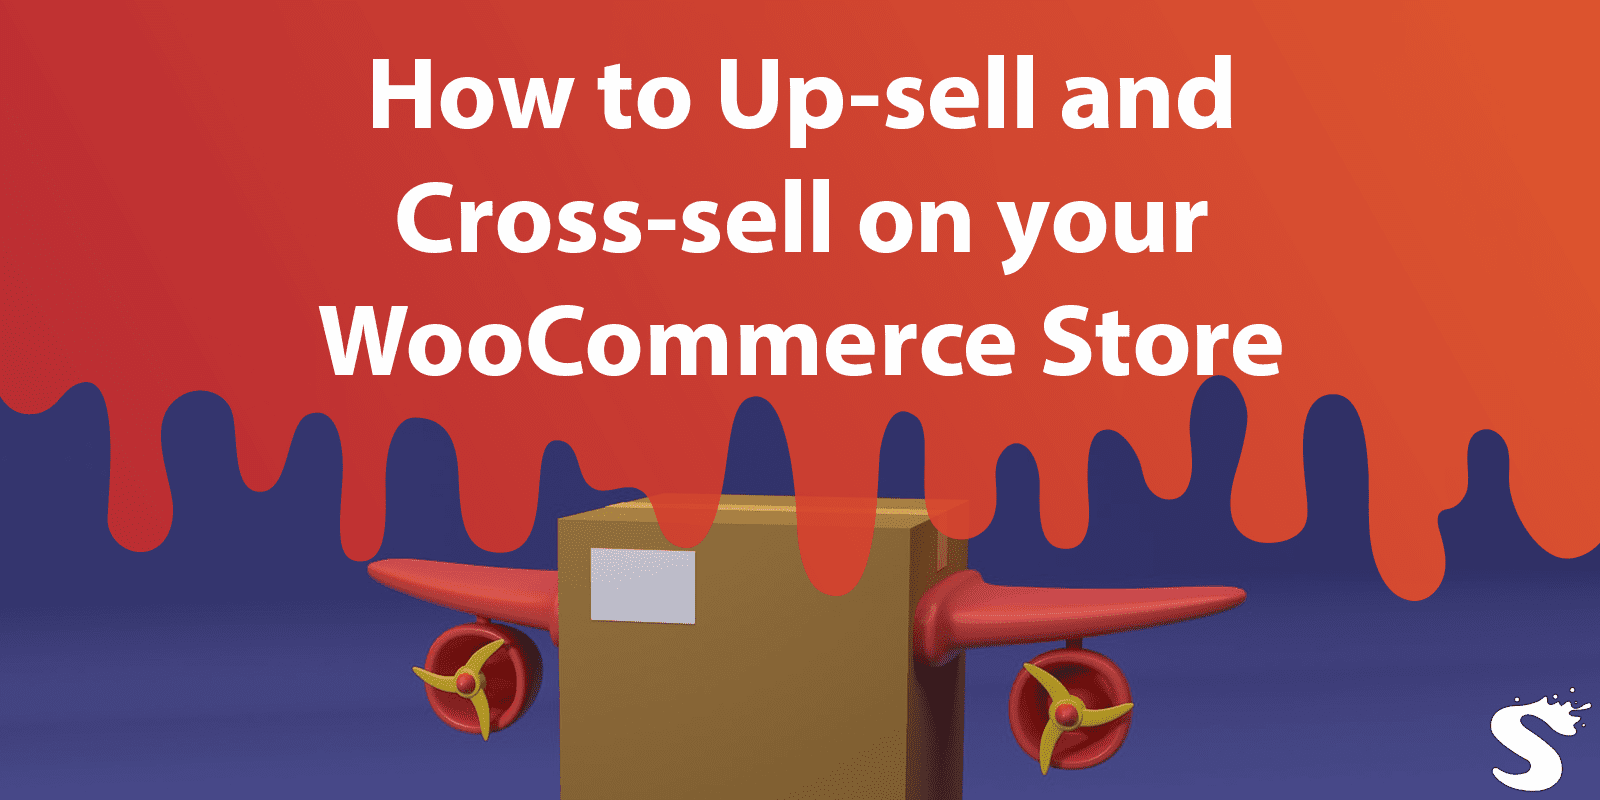 How to Up-sell and Cross-sell on your WooCommerce Store